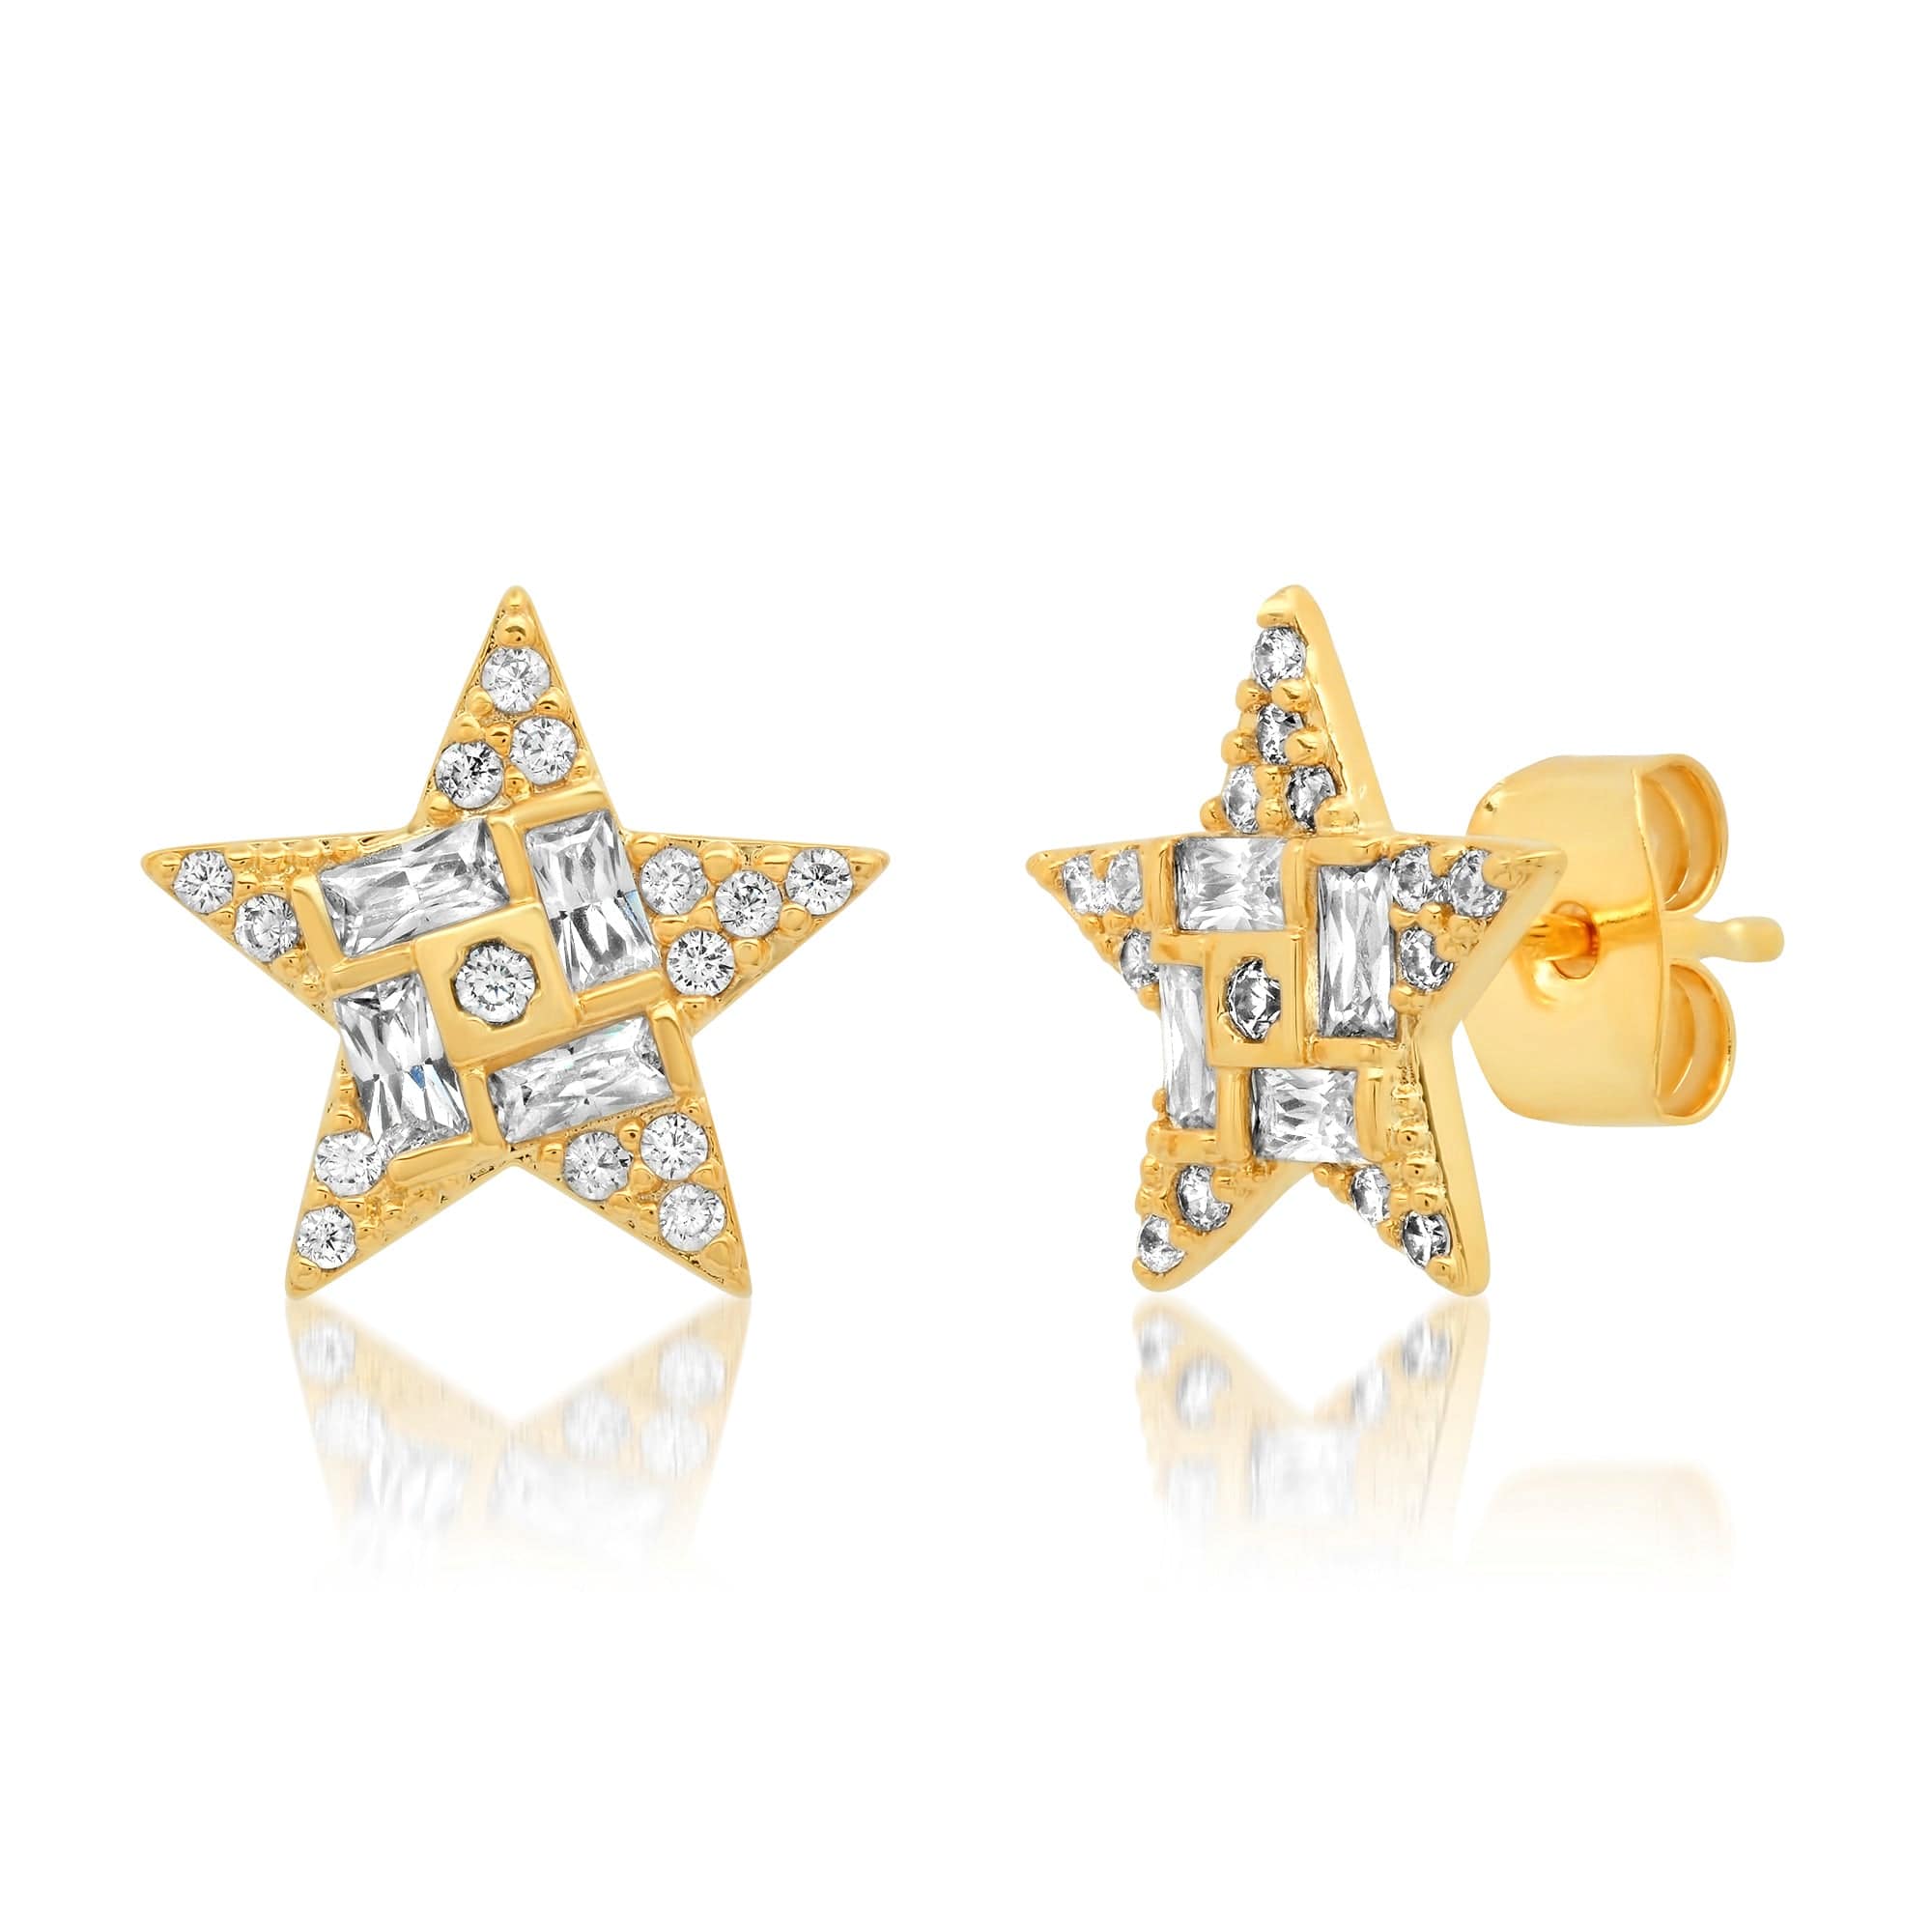 TAI JEWELRY Earrings Gold Pave Star Studs